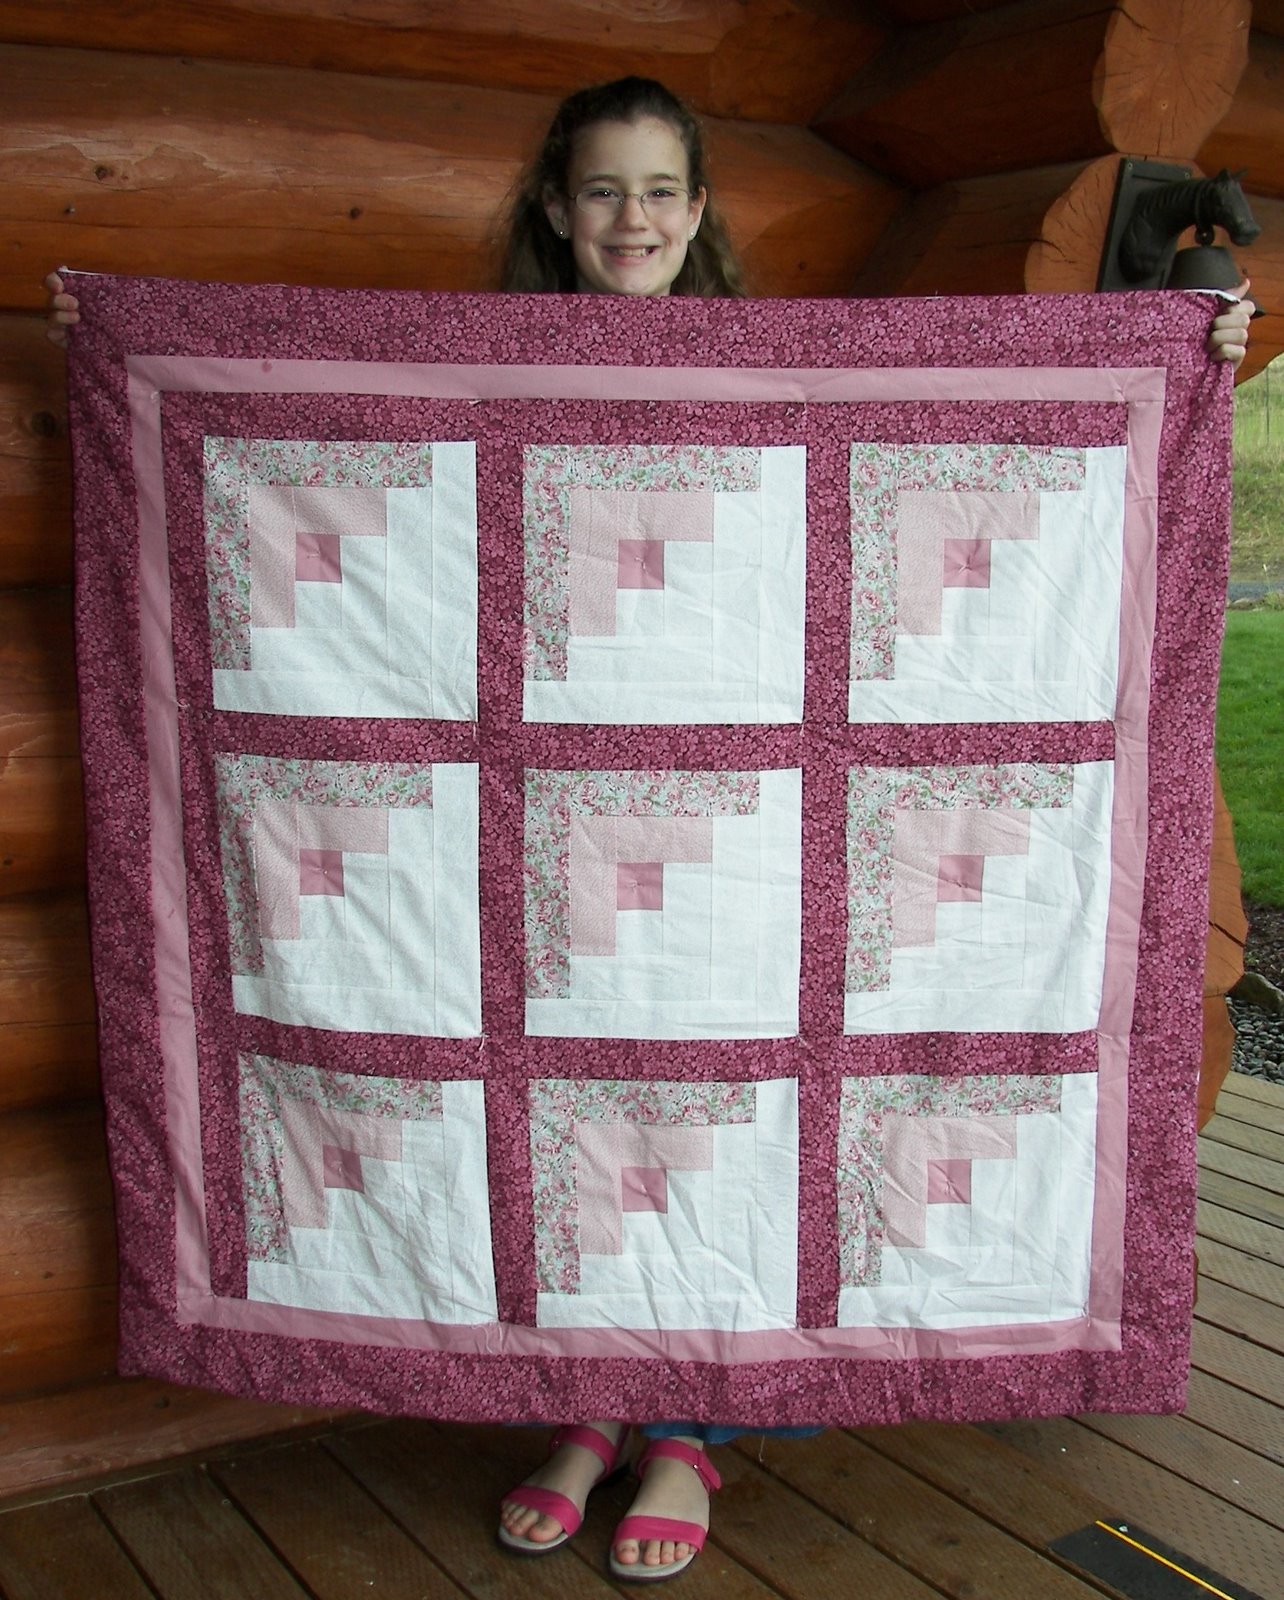 [Valerie+and+her+quilt.JPG]